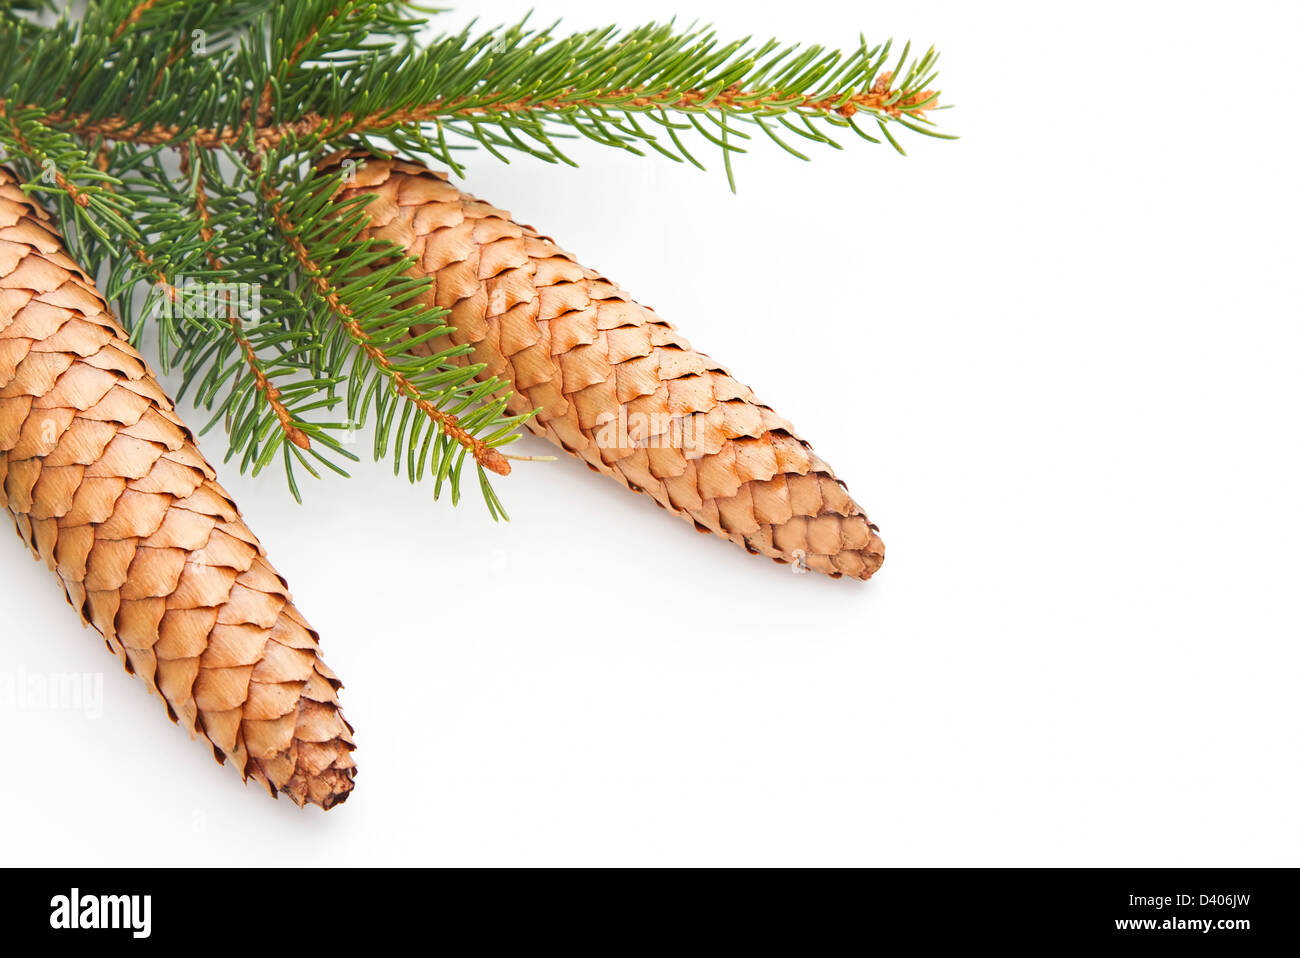 Pine cones and green spruce christmas tree on a white background Stock Photo